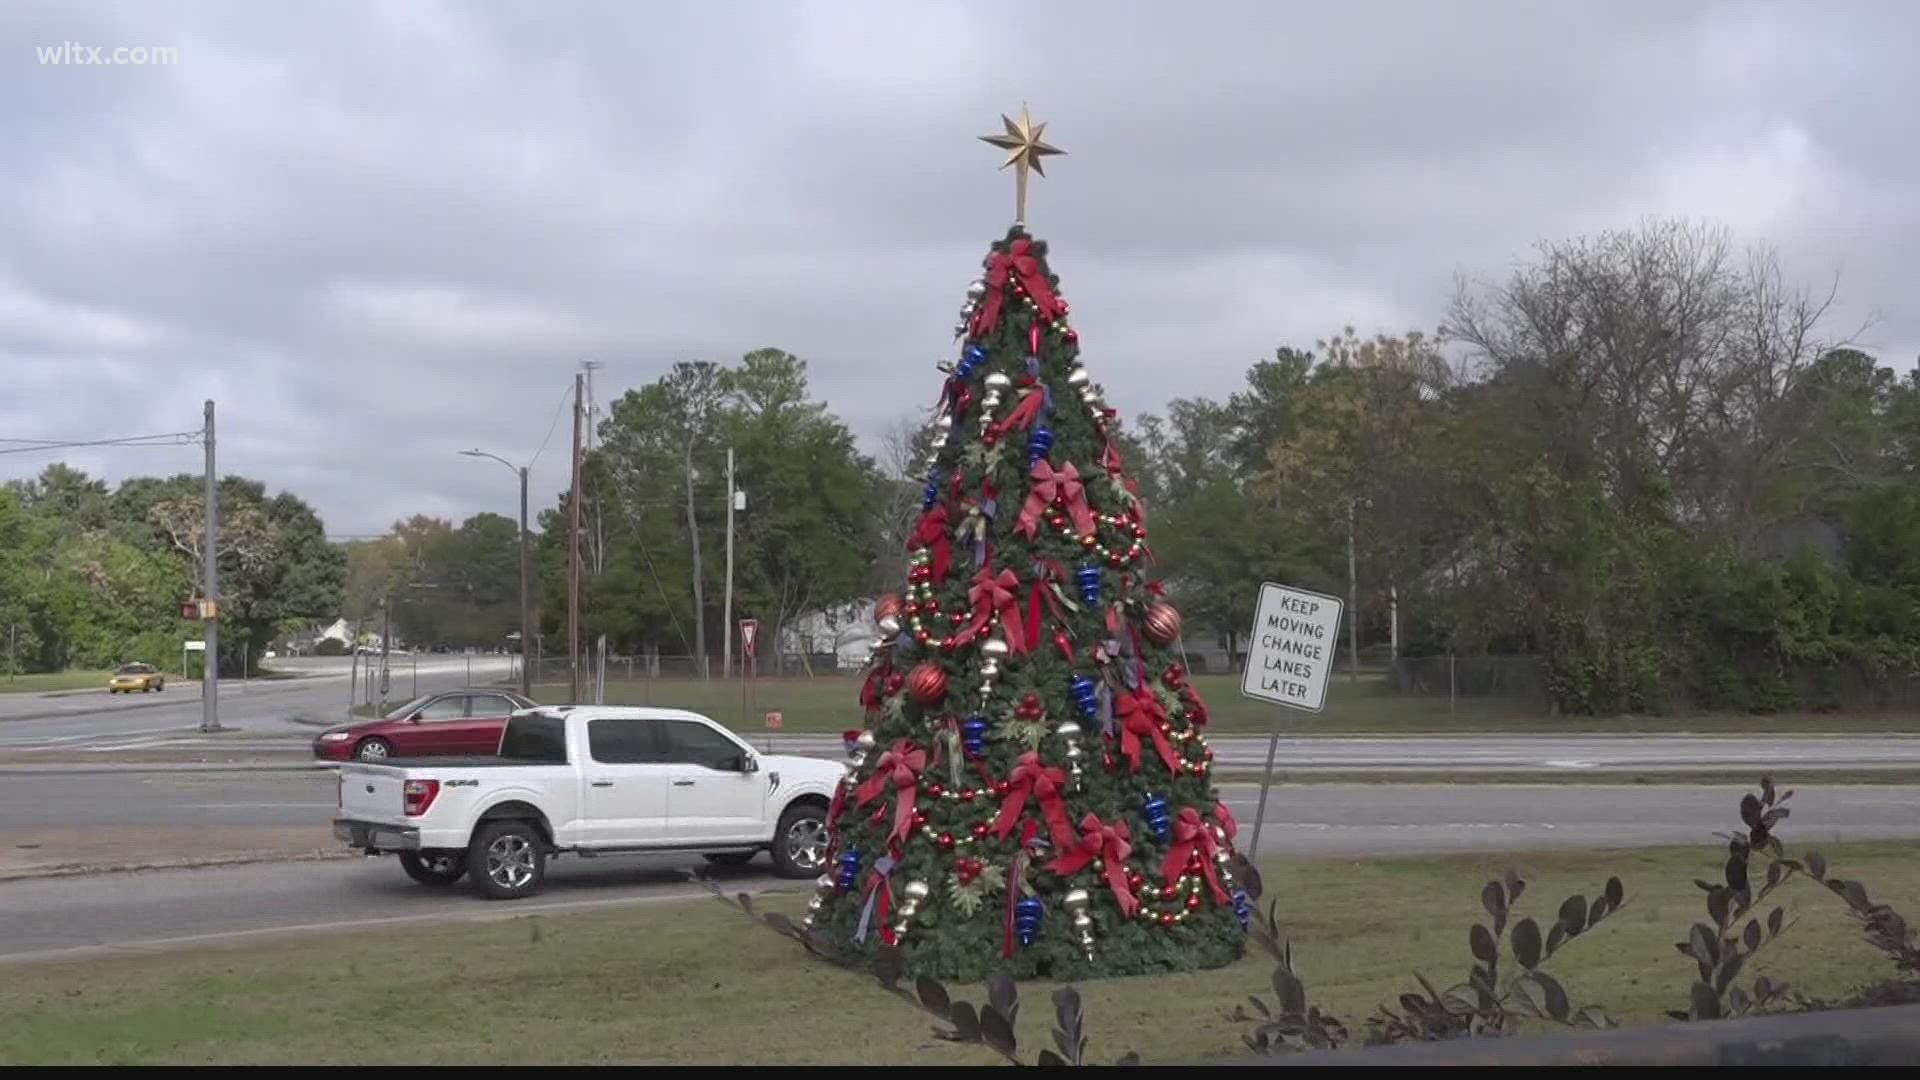 The tree is up and lights are out in West Columbia for the holiday.